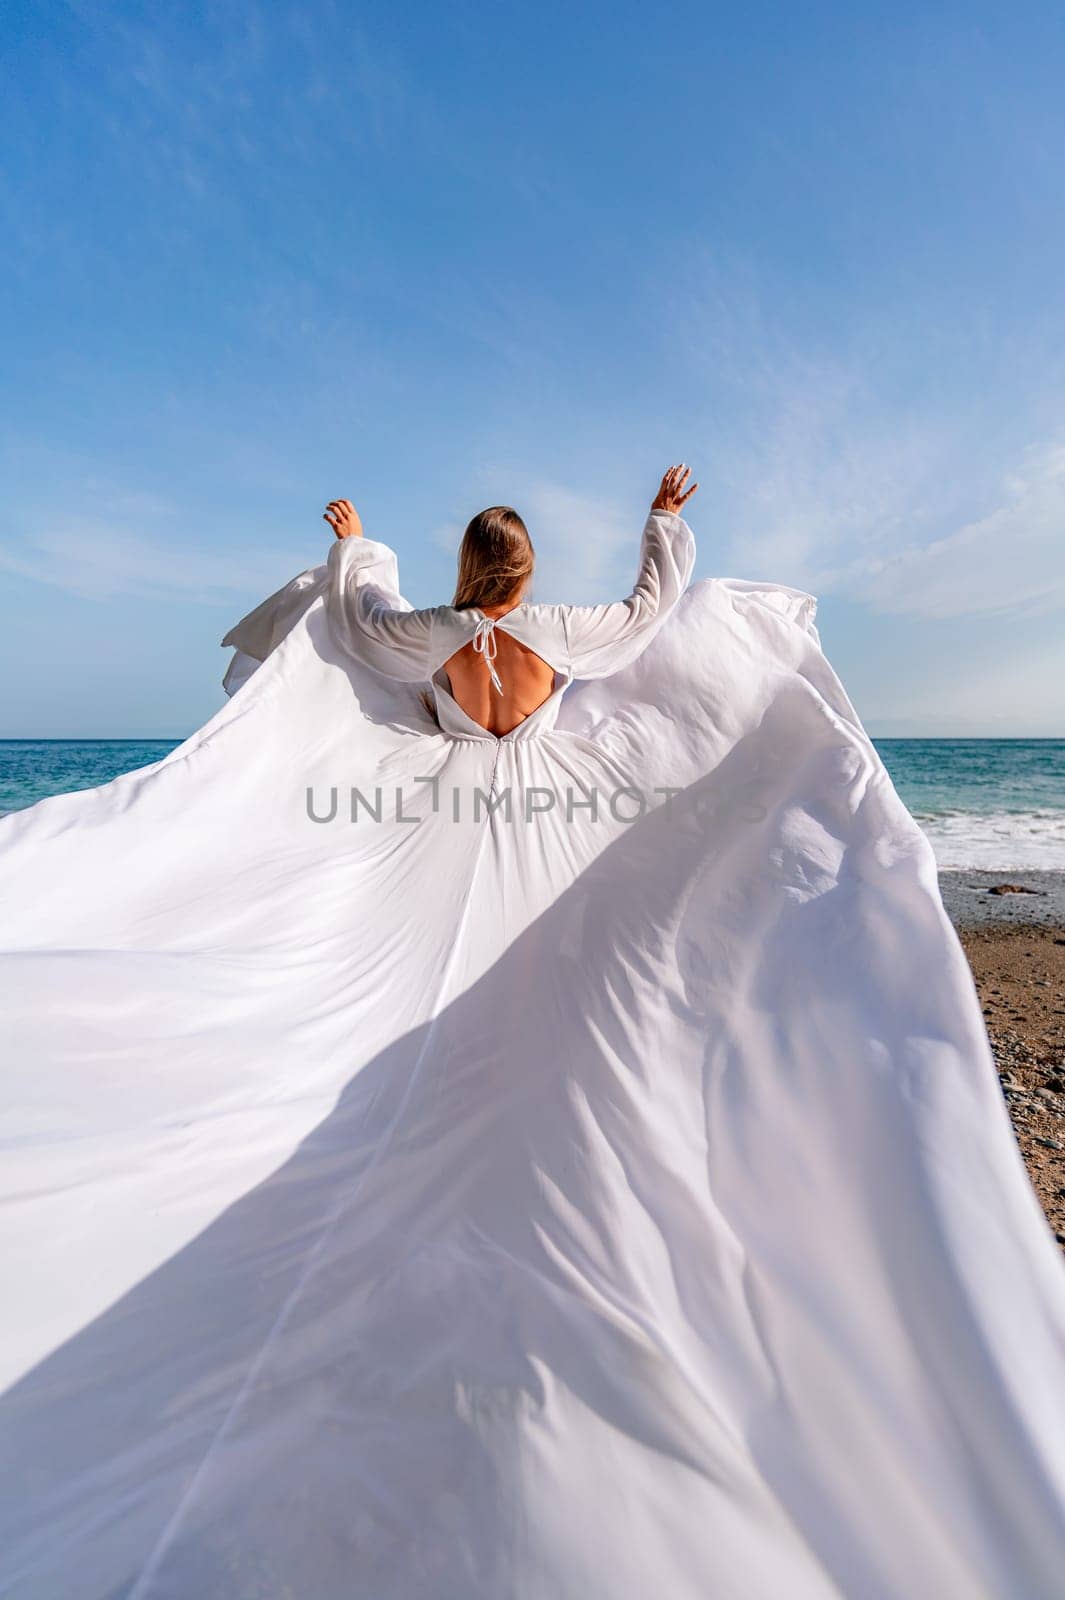 Woman beach white dress flying on Wind. Summer Vacation. A happy woman takes vacation photos to send to friends. by Matiunina